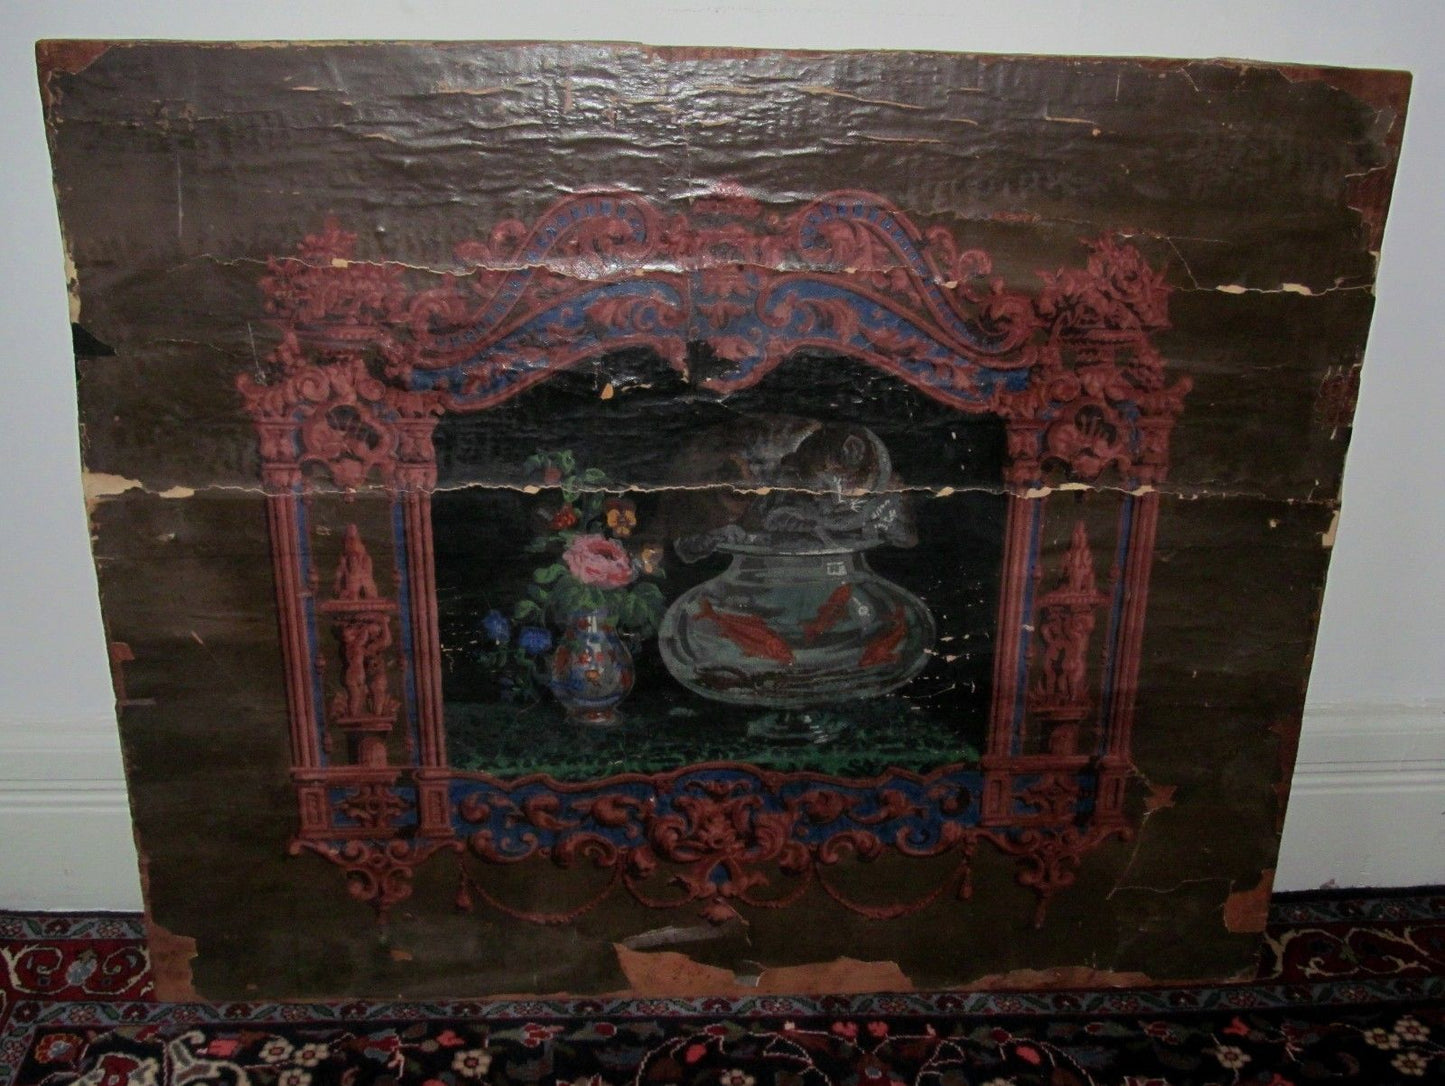 EARLY 19TH CENTURY FEDERAL PERIOD DECORATED FIRE BOARD FIRE PLACE COVER-